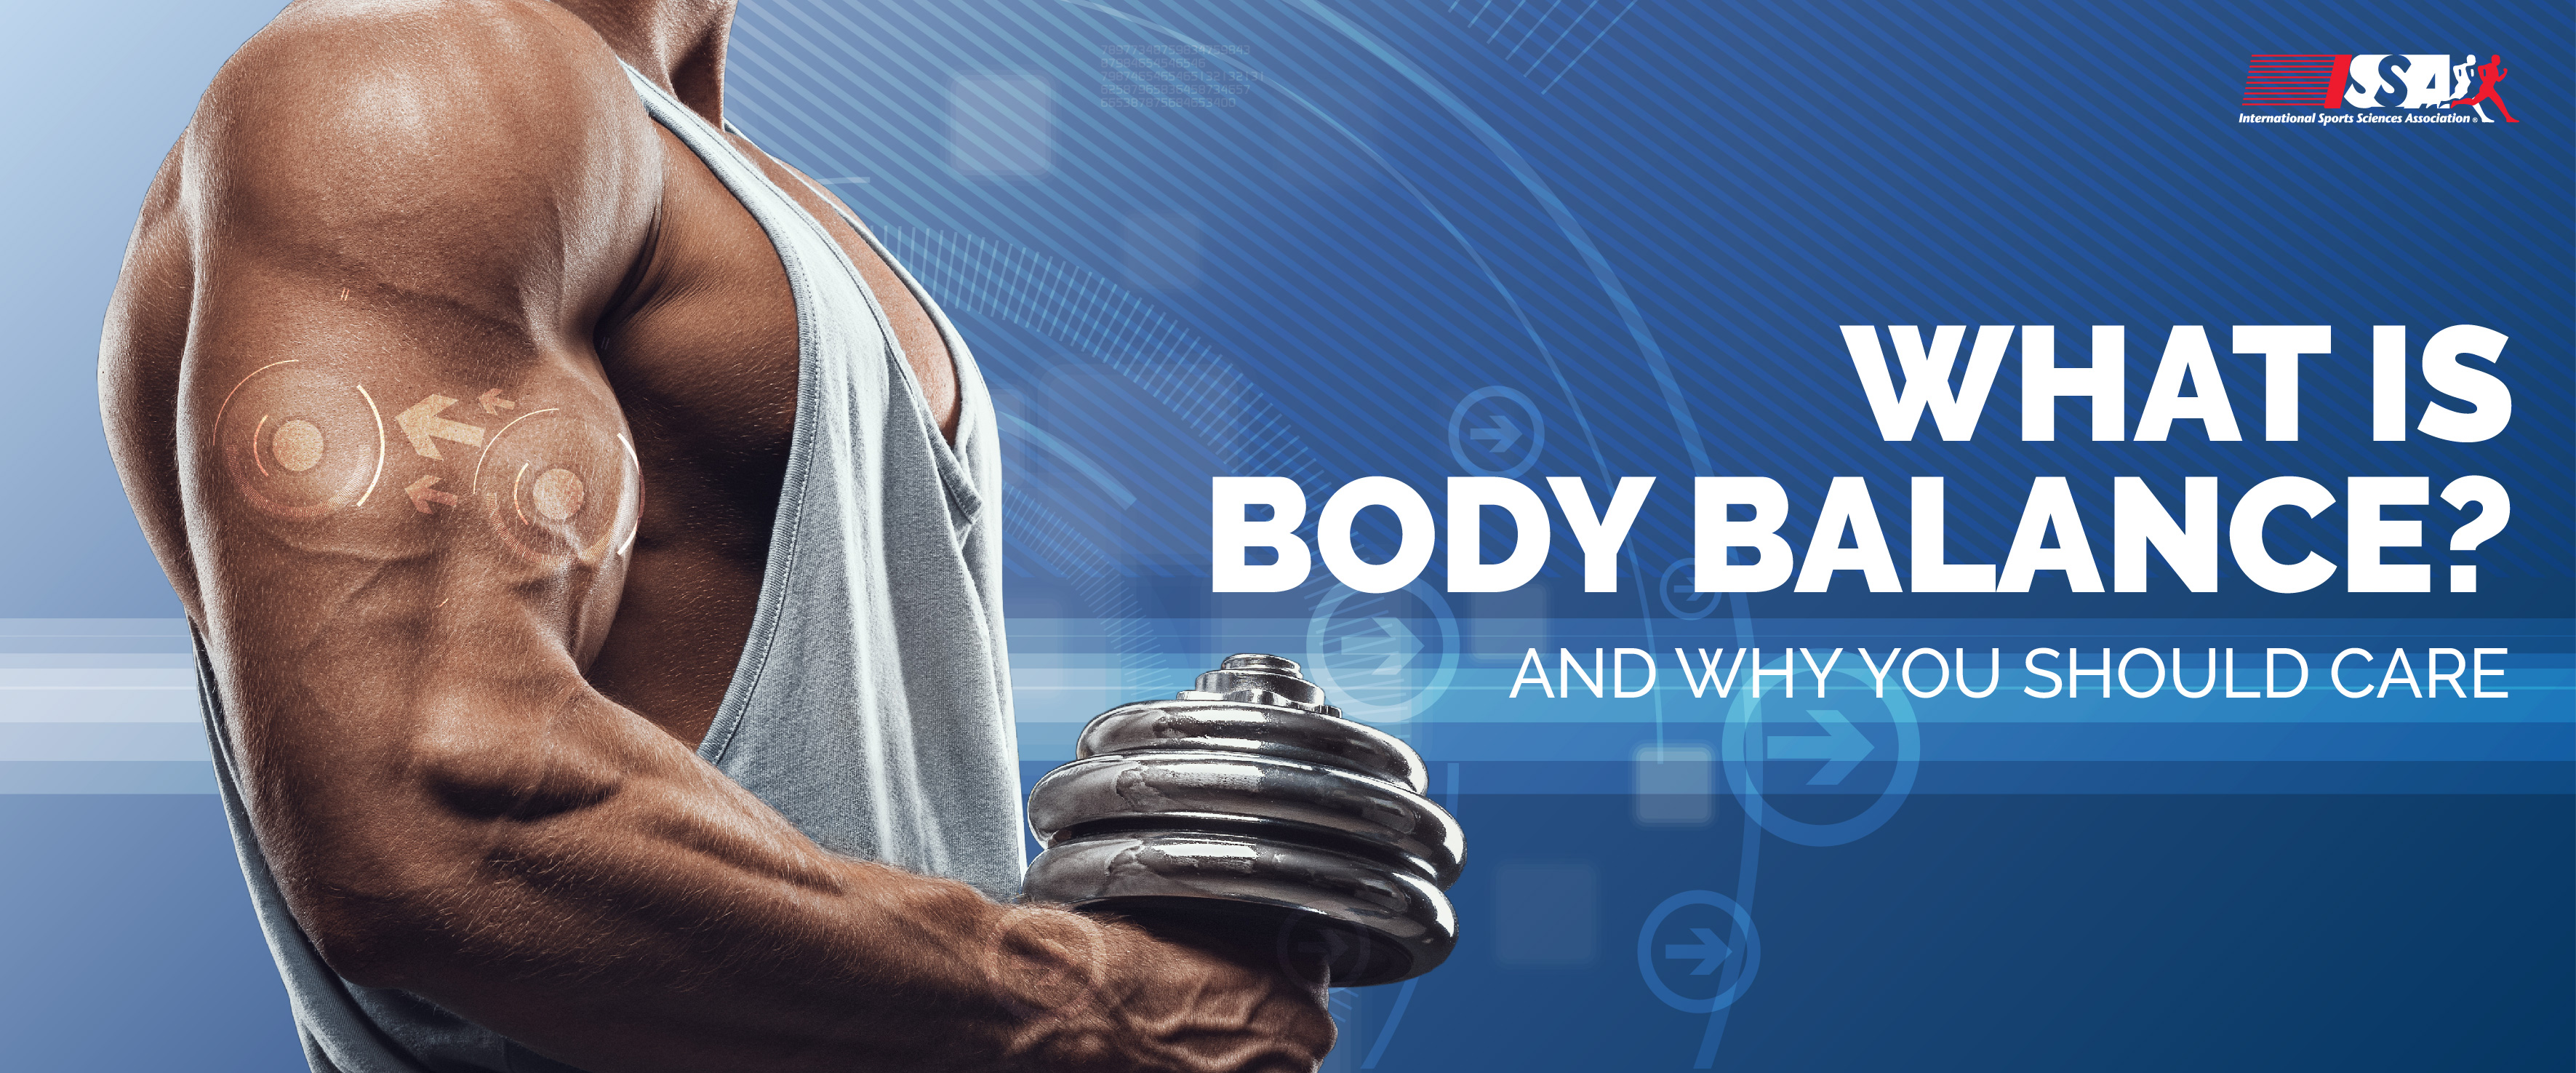 What is Body Balance and Why Should You Care?